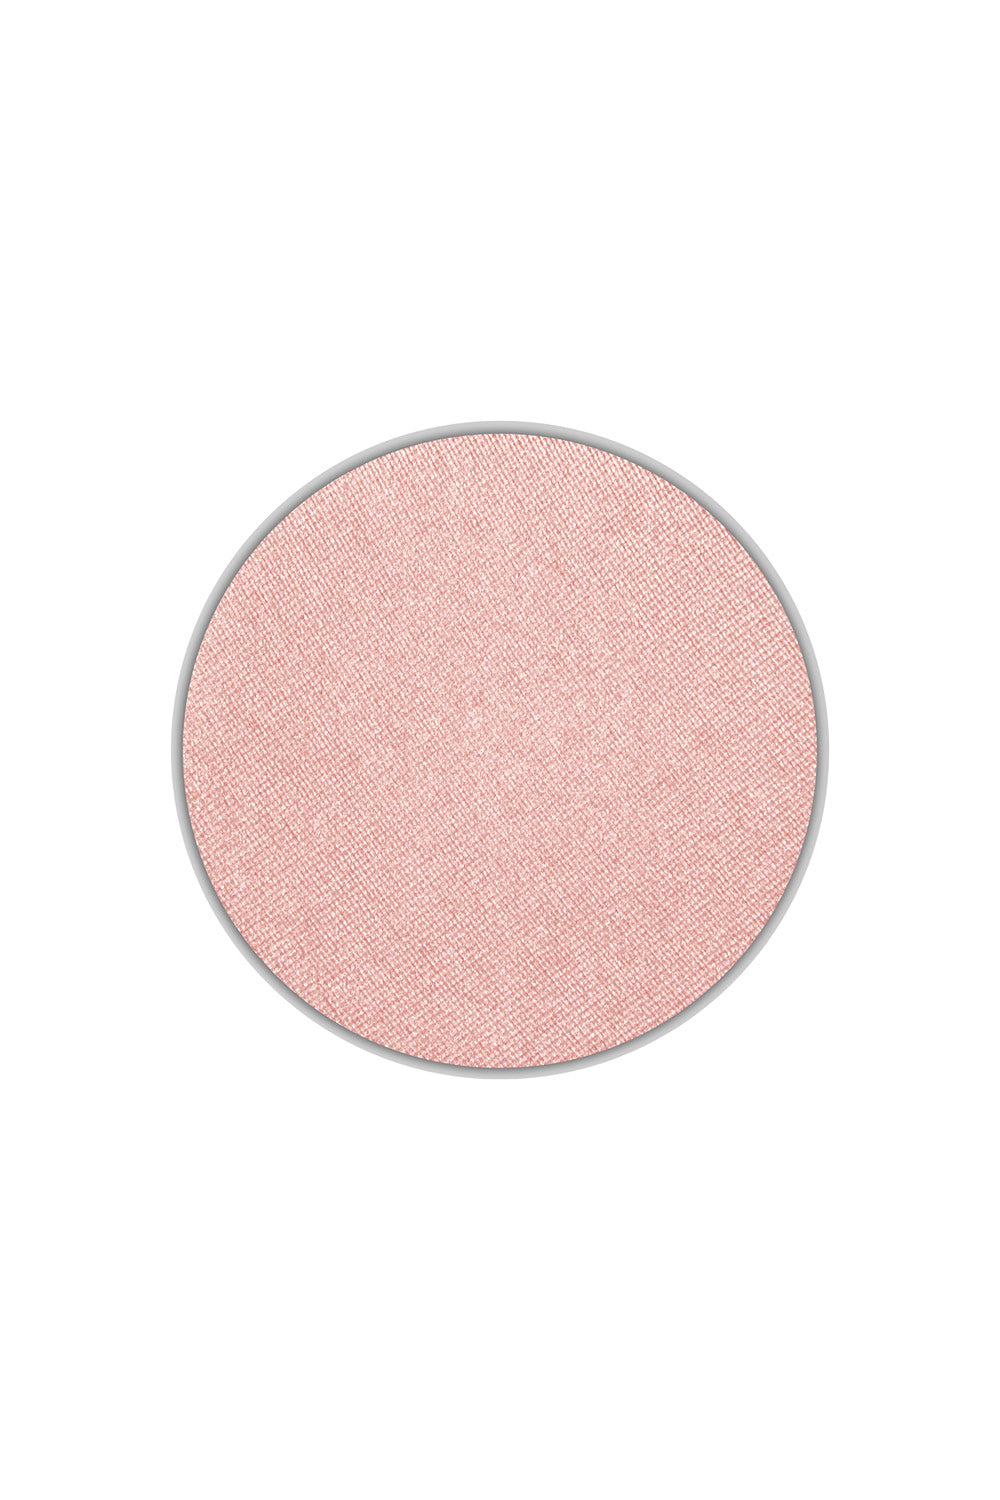 Champagne Frost - Type 3 Eyeshadow Pan